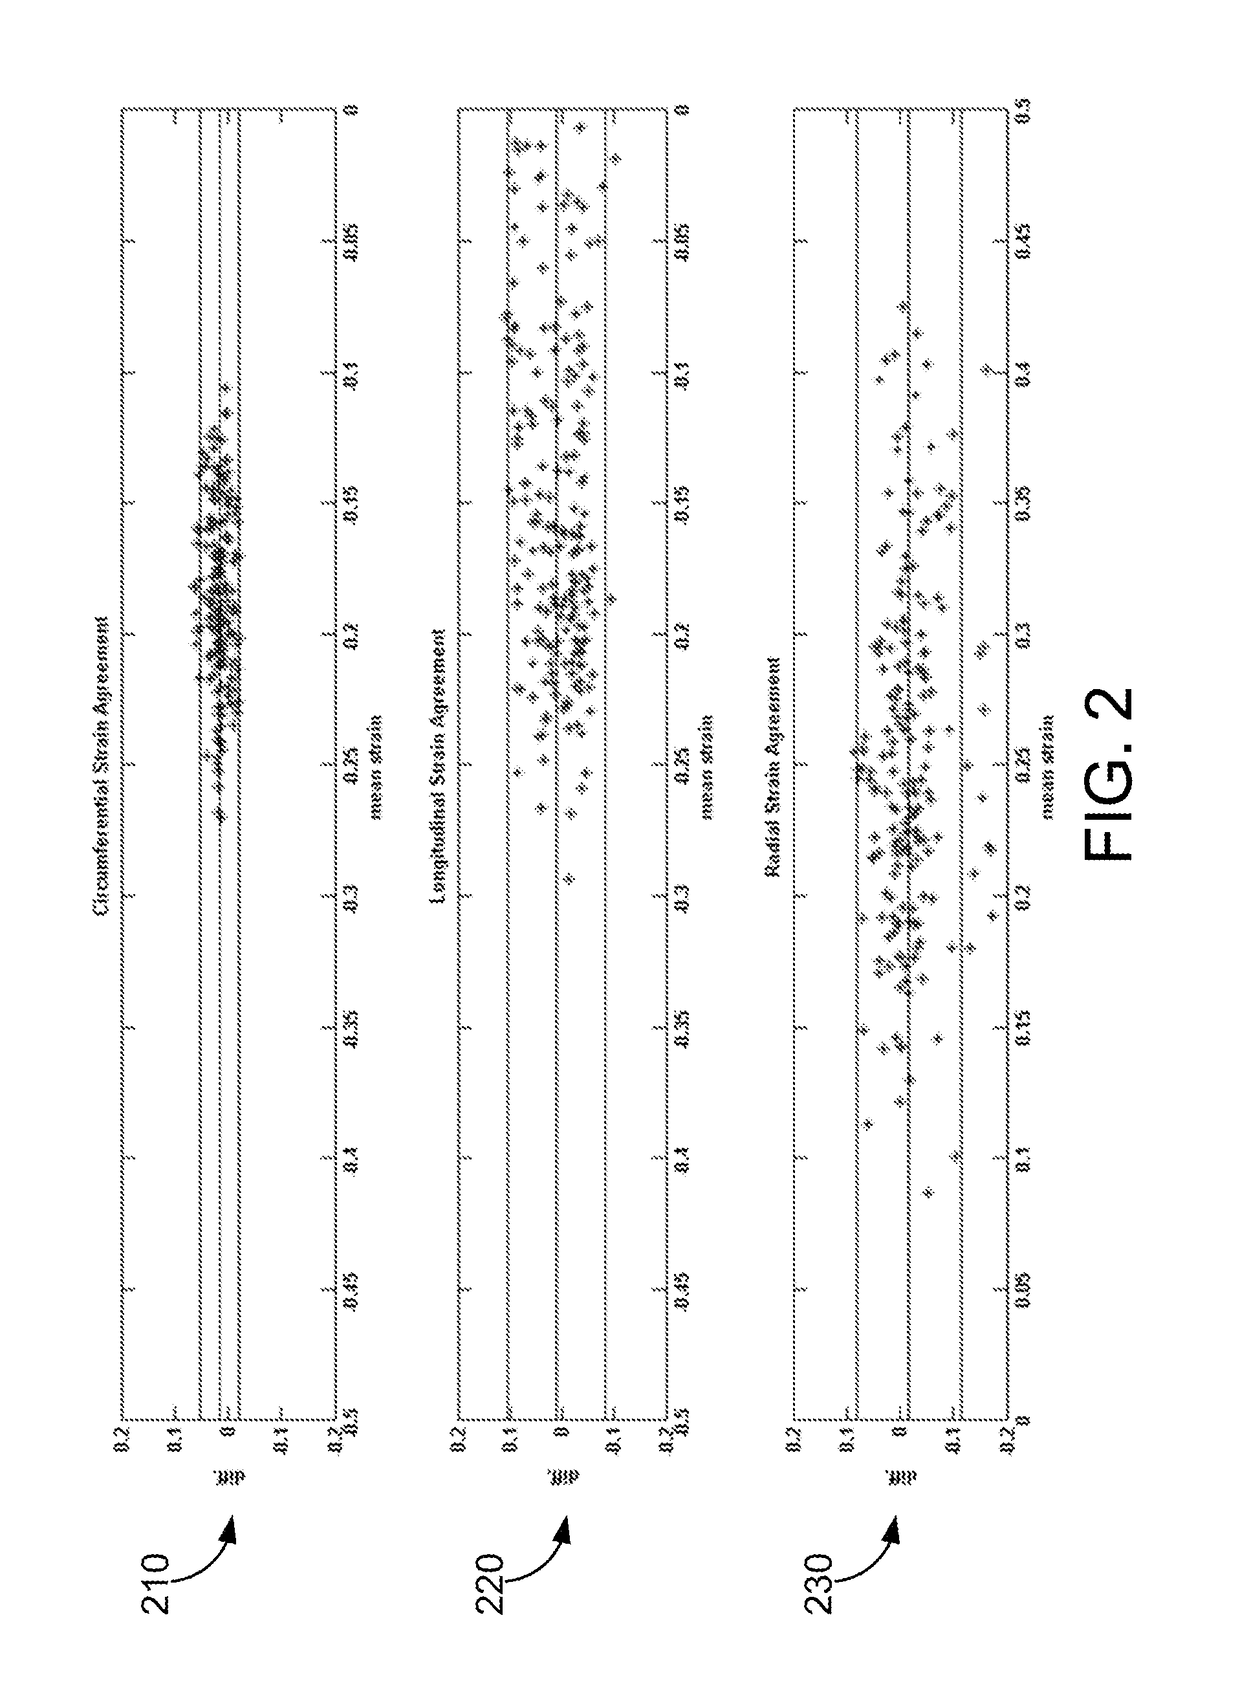 Systems and methods for measuring cardiac strain